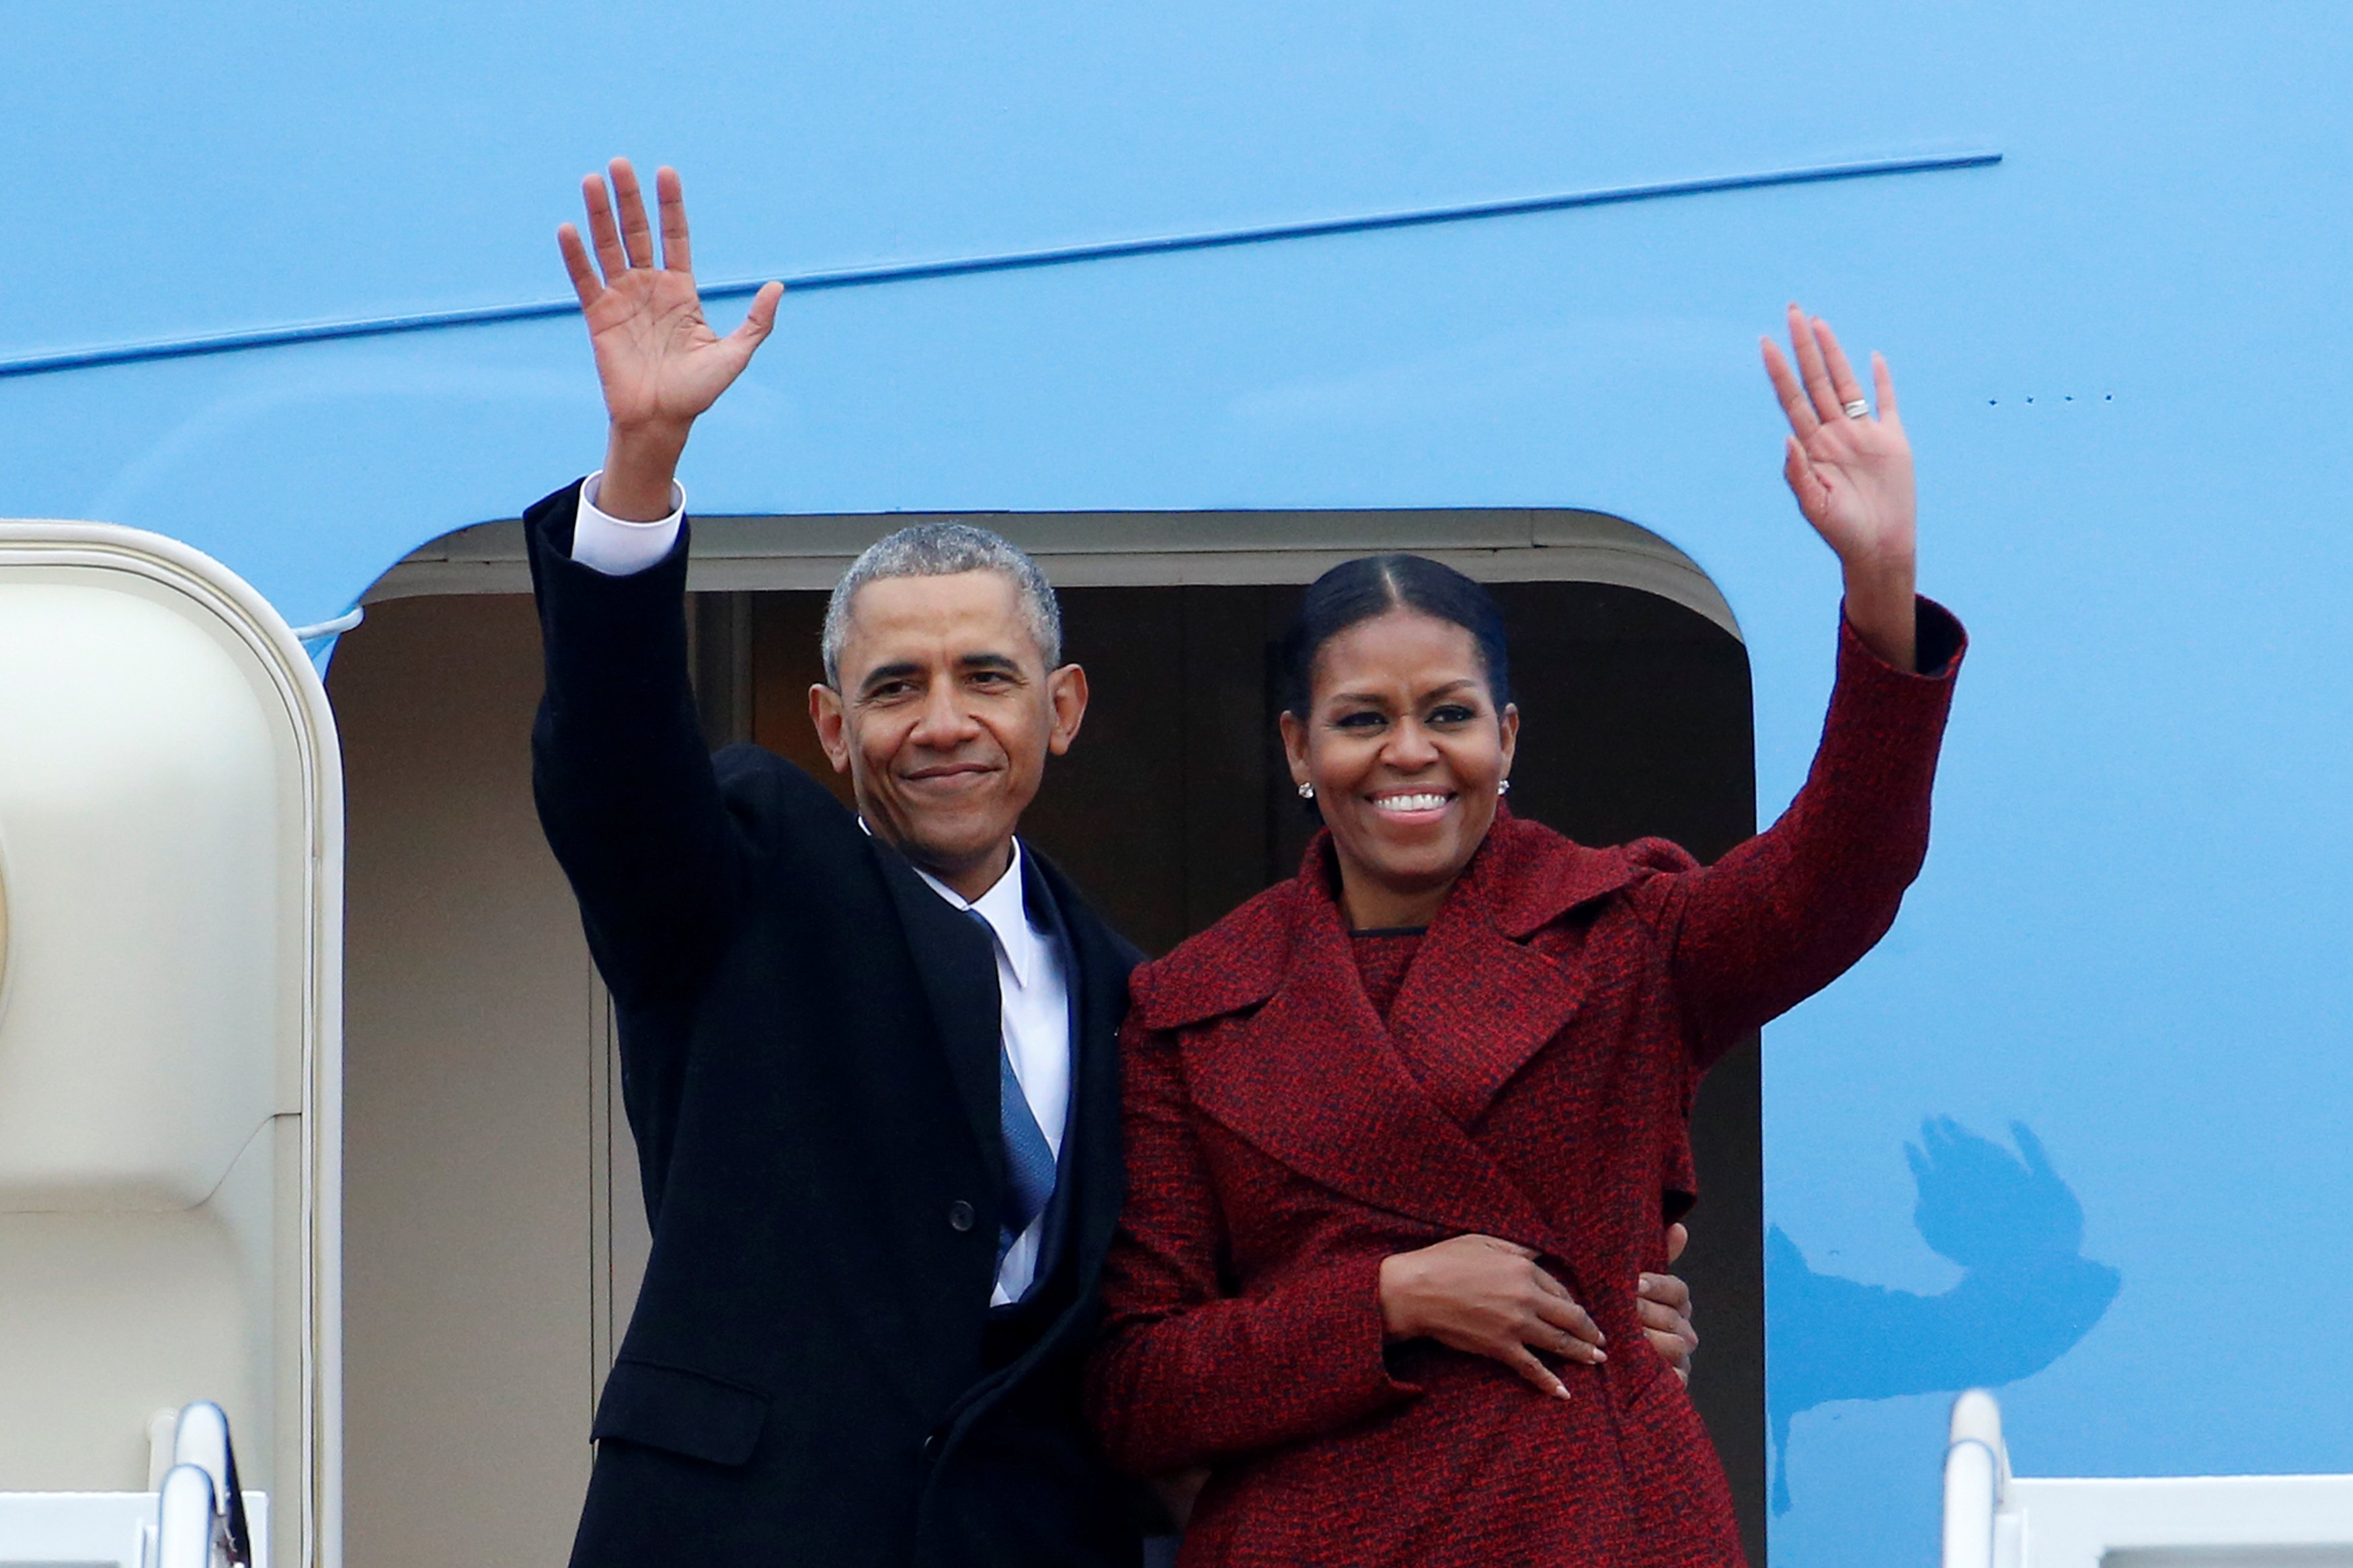 Michelle Obama after Trump's inauguration: 'Bye, Felicia!'